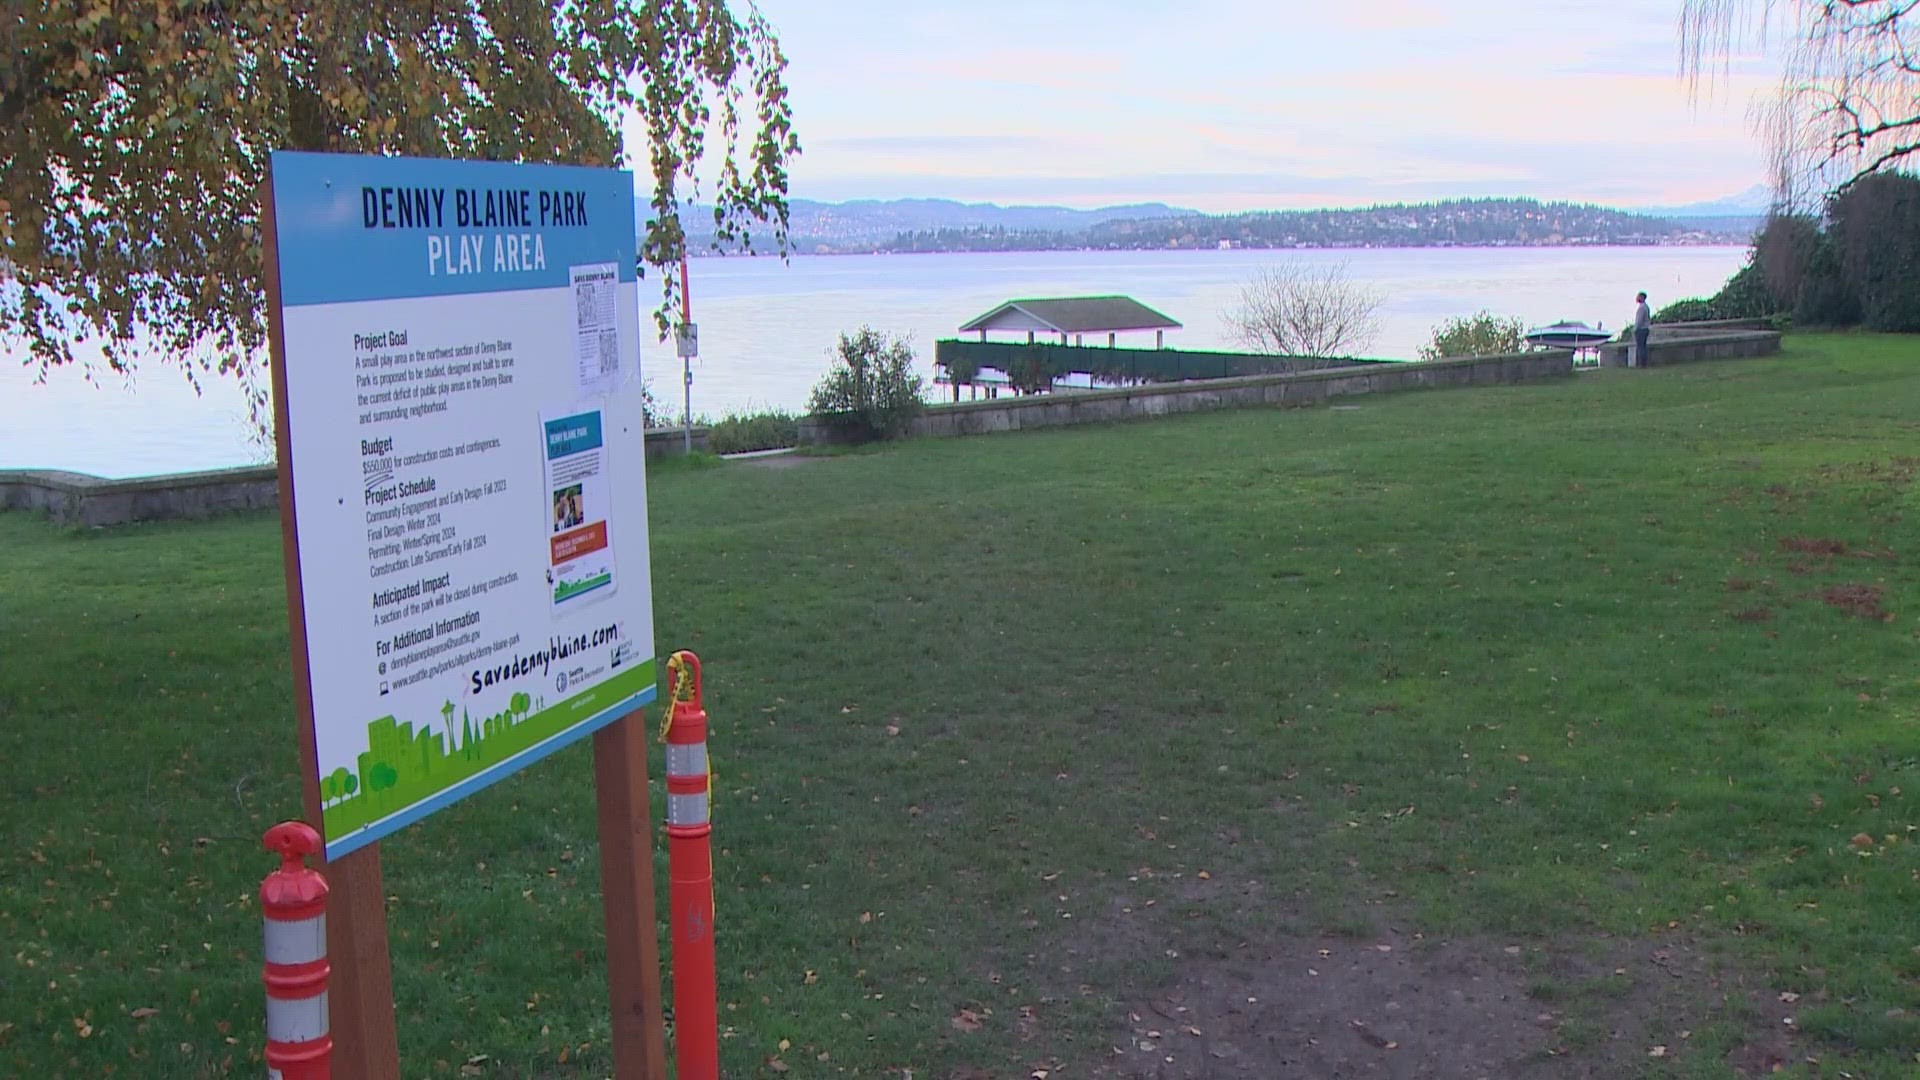 Denny Blaine Park is a well-known nude beach in the heart of Seattle.